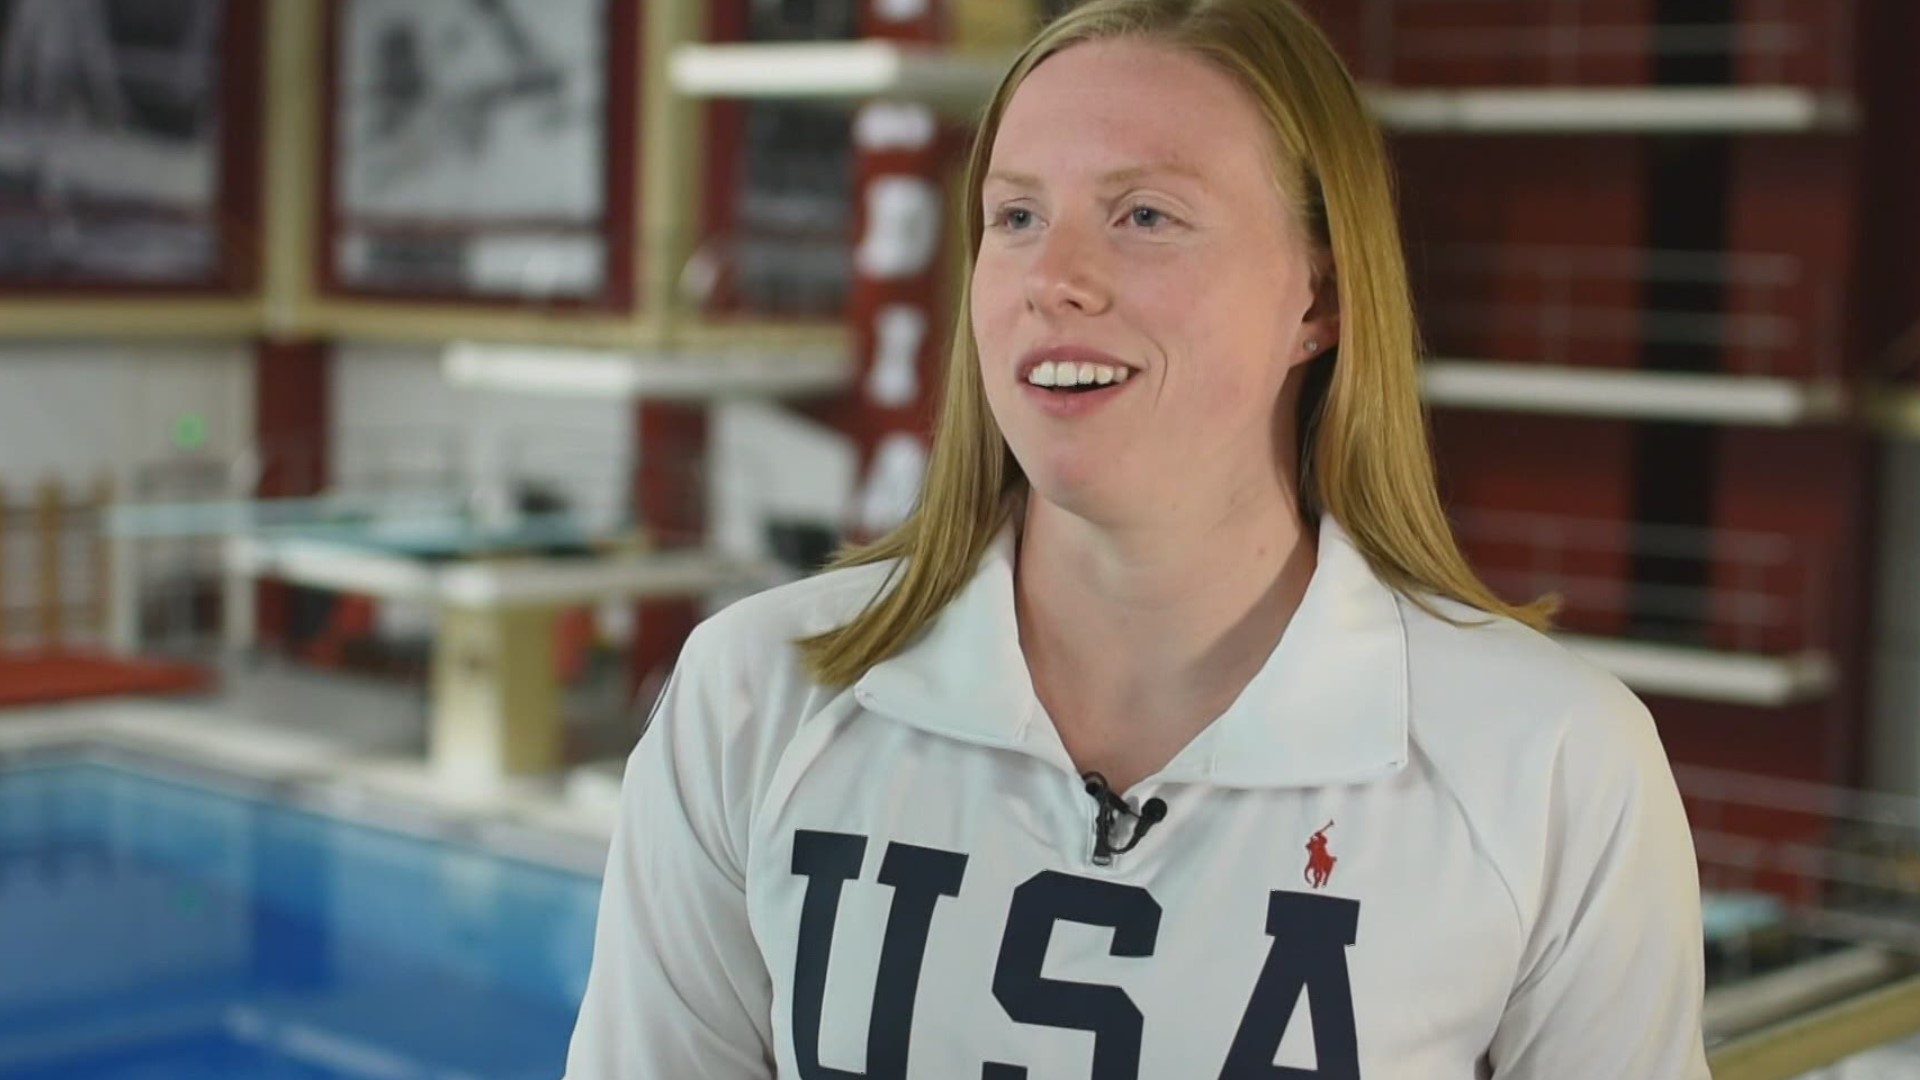 Before Olympian Lilly King headed to the Olympic village, Dave Calabro got a chance to catch up with her about her preparation and mindset heading into the games.